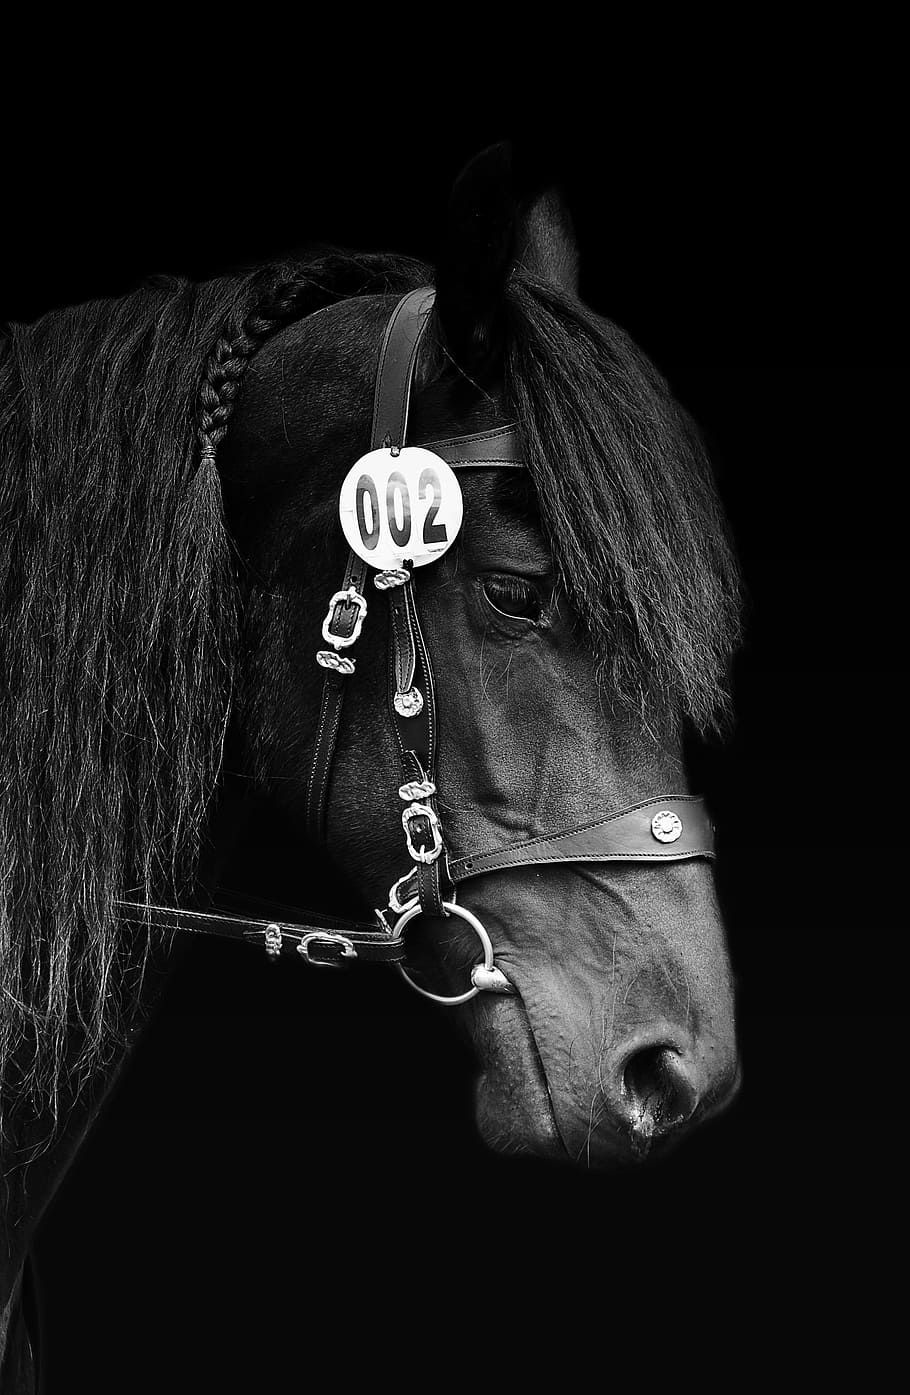 Free download | HD wallpaper: black horse head, black and white ...